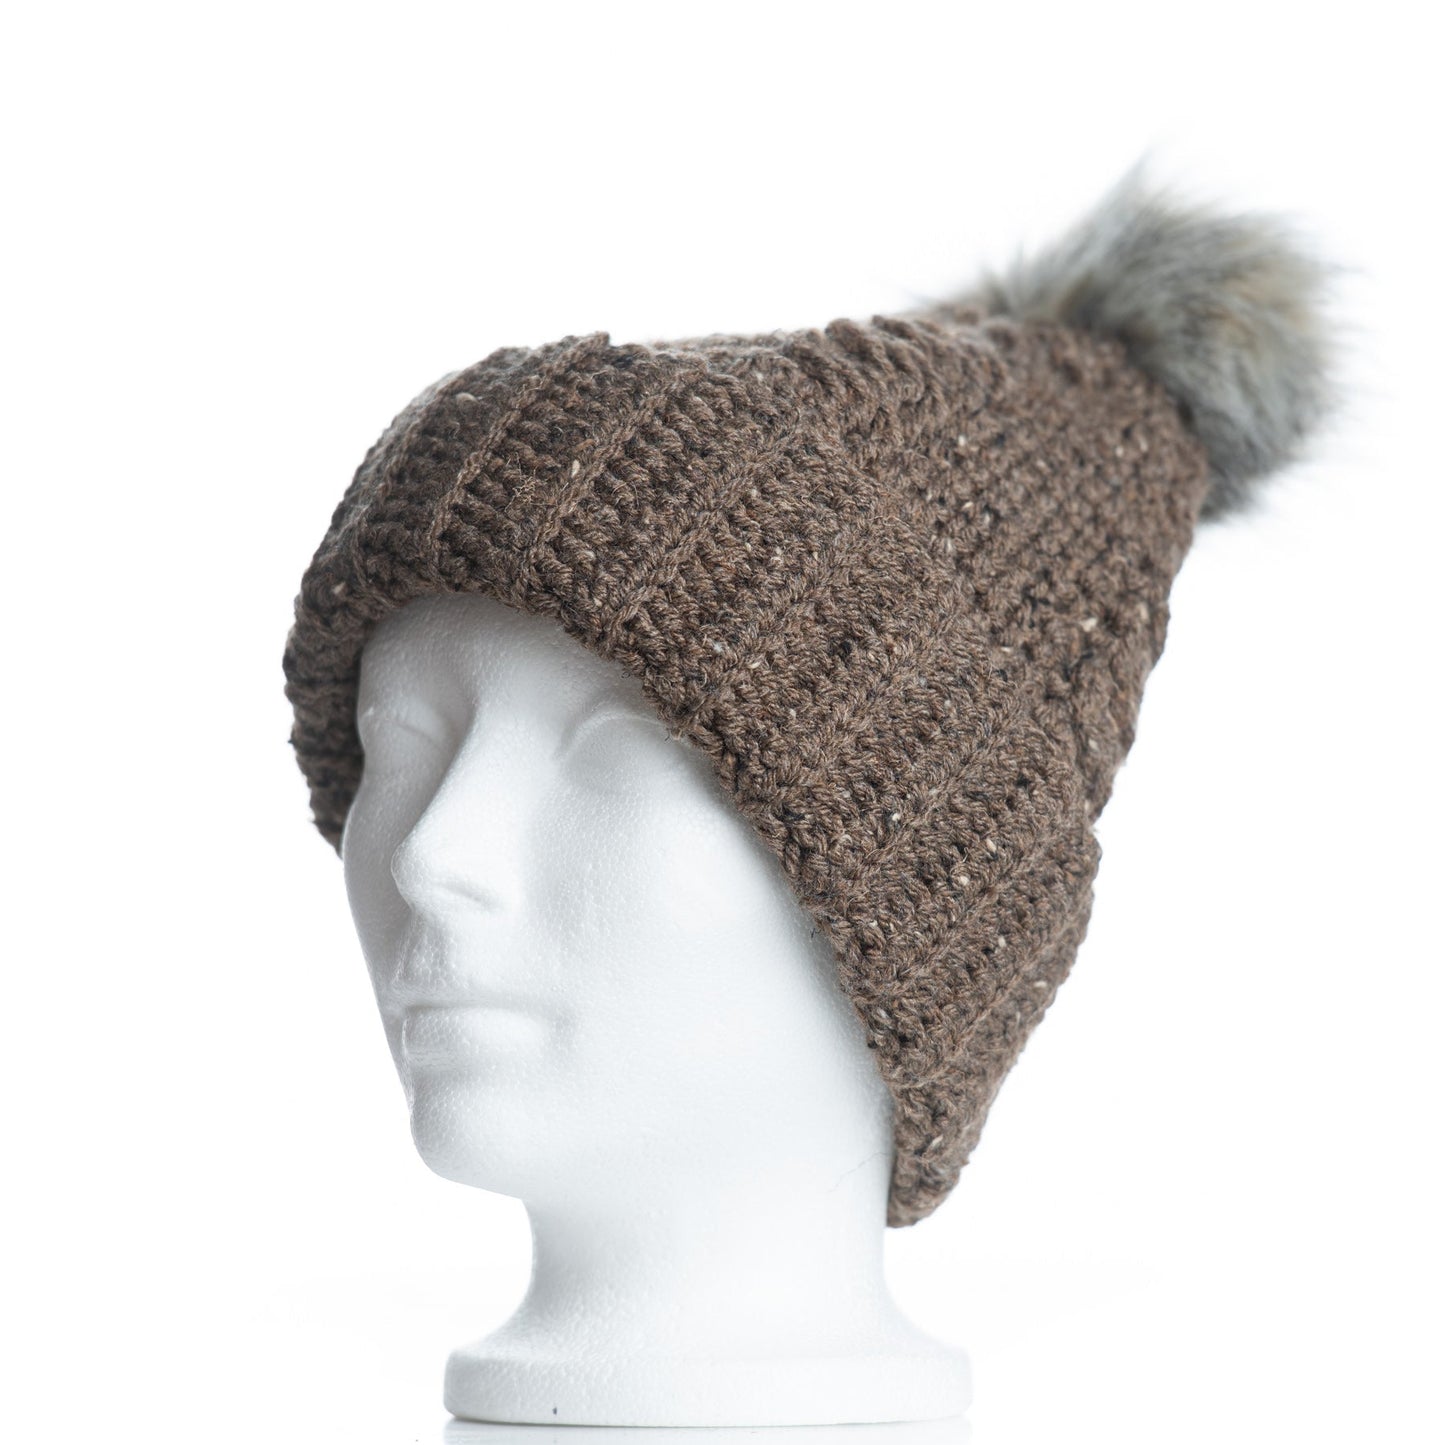 Rustic Cable Toque in Barley with Smoke Pom